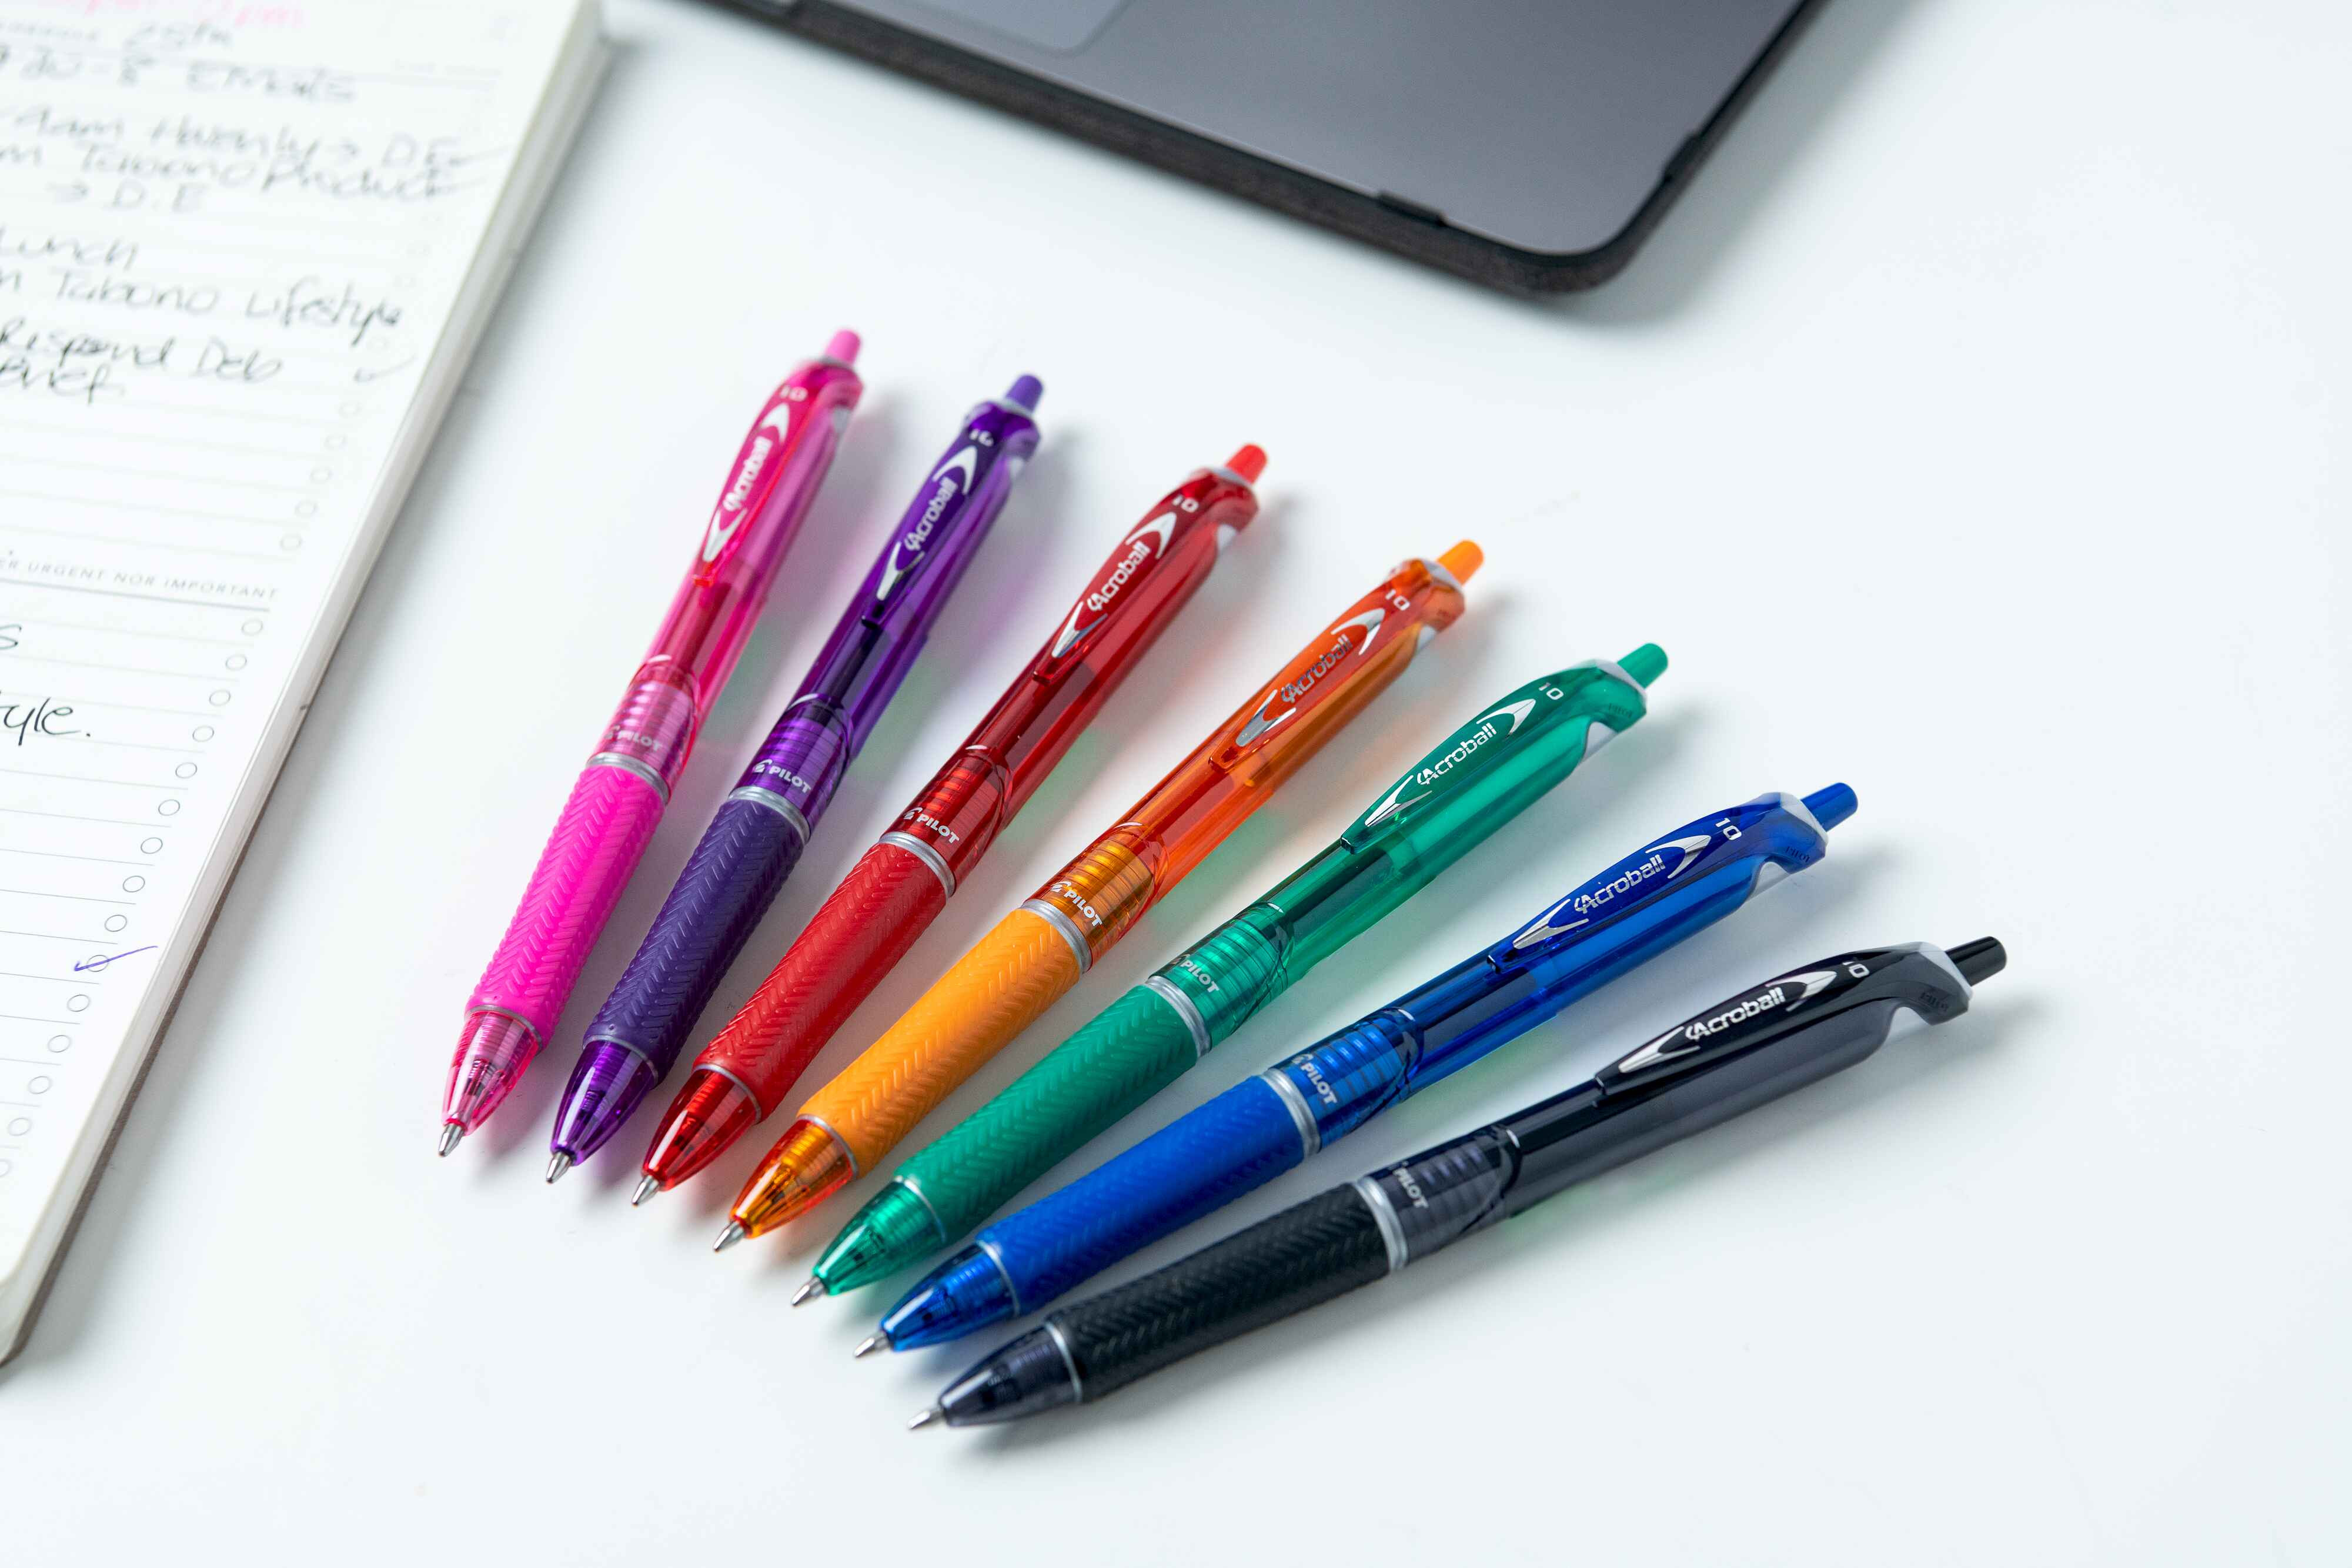 BeGreeN Acroball pens displayed in a semi-circle, showcasing their large choice of colours.